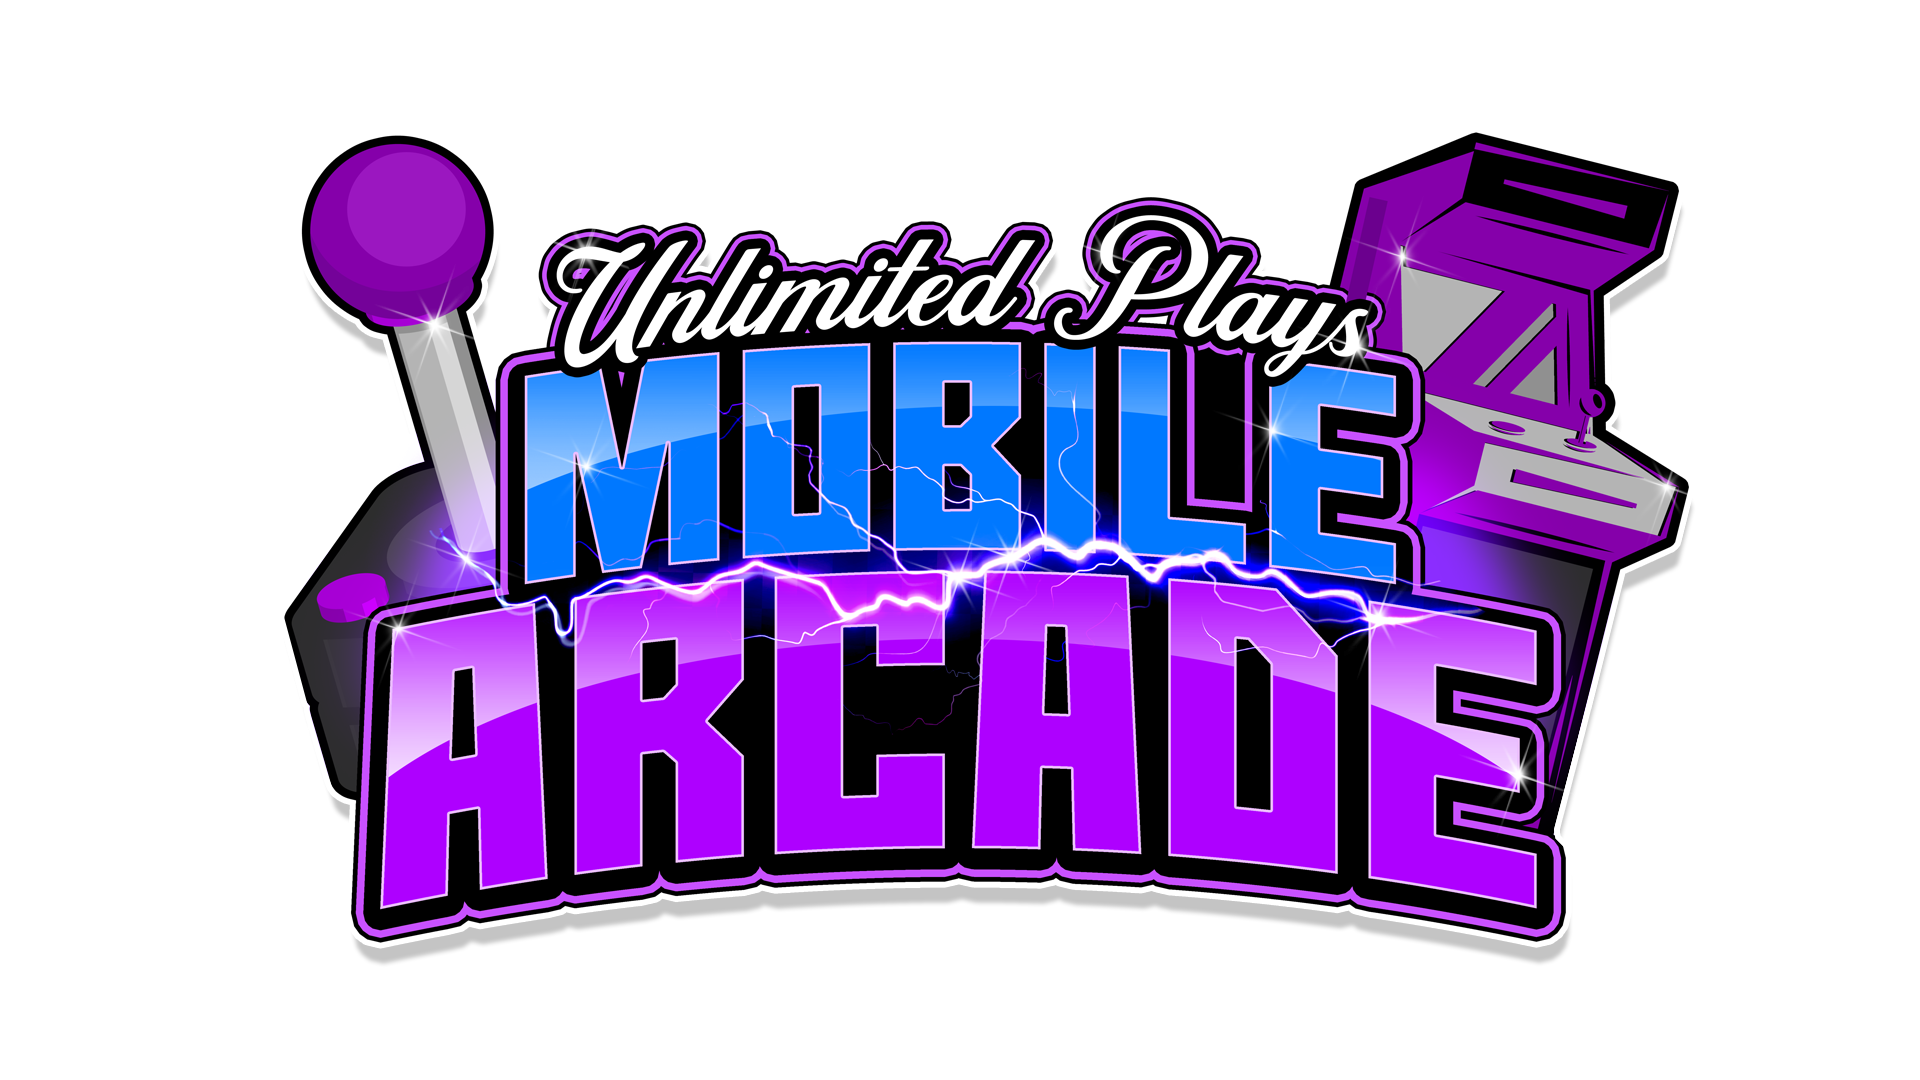 UNLIMITED PLAYS MOBILE ARCADE